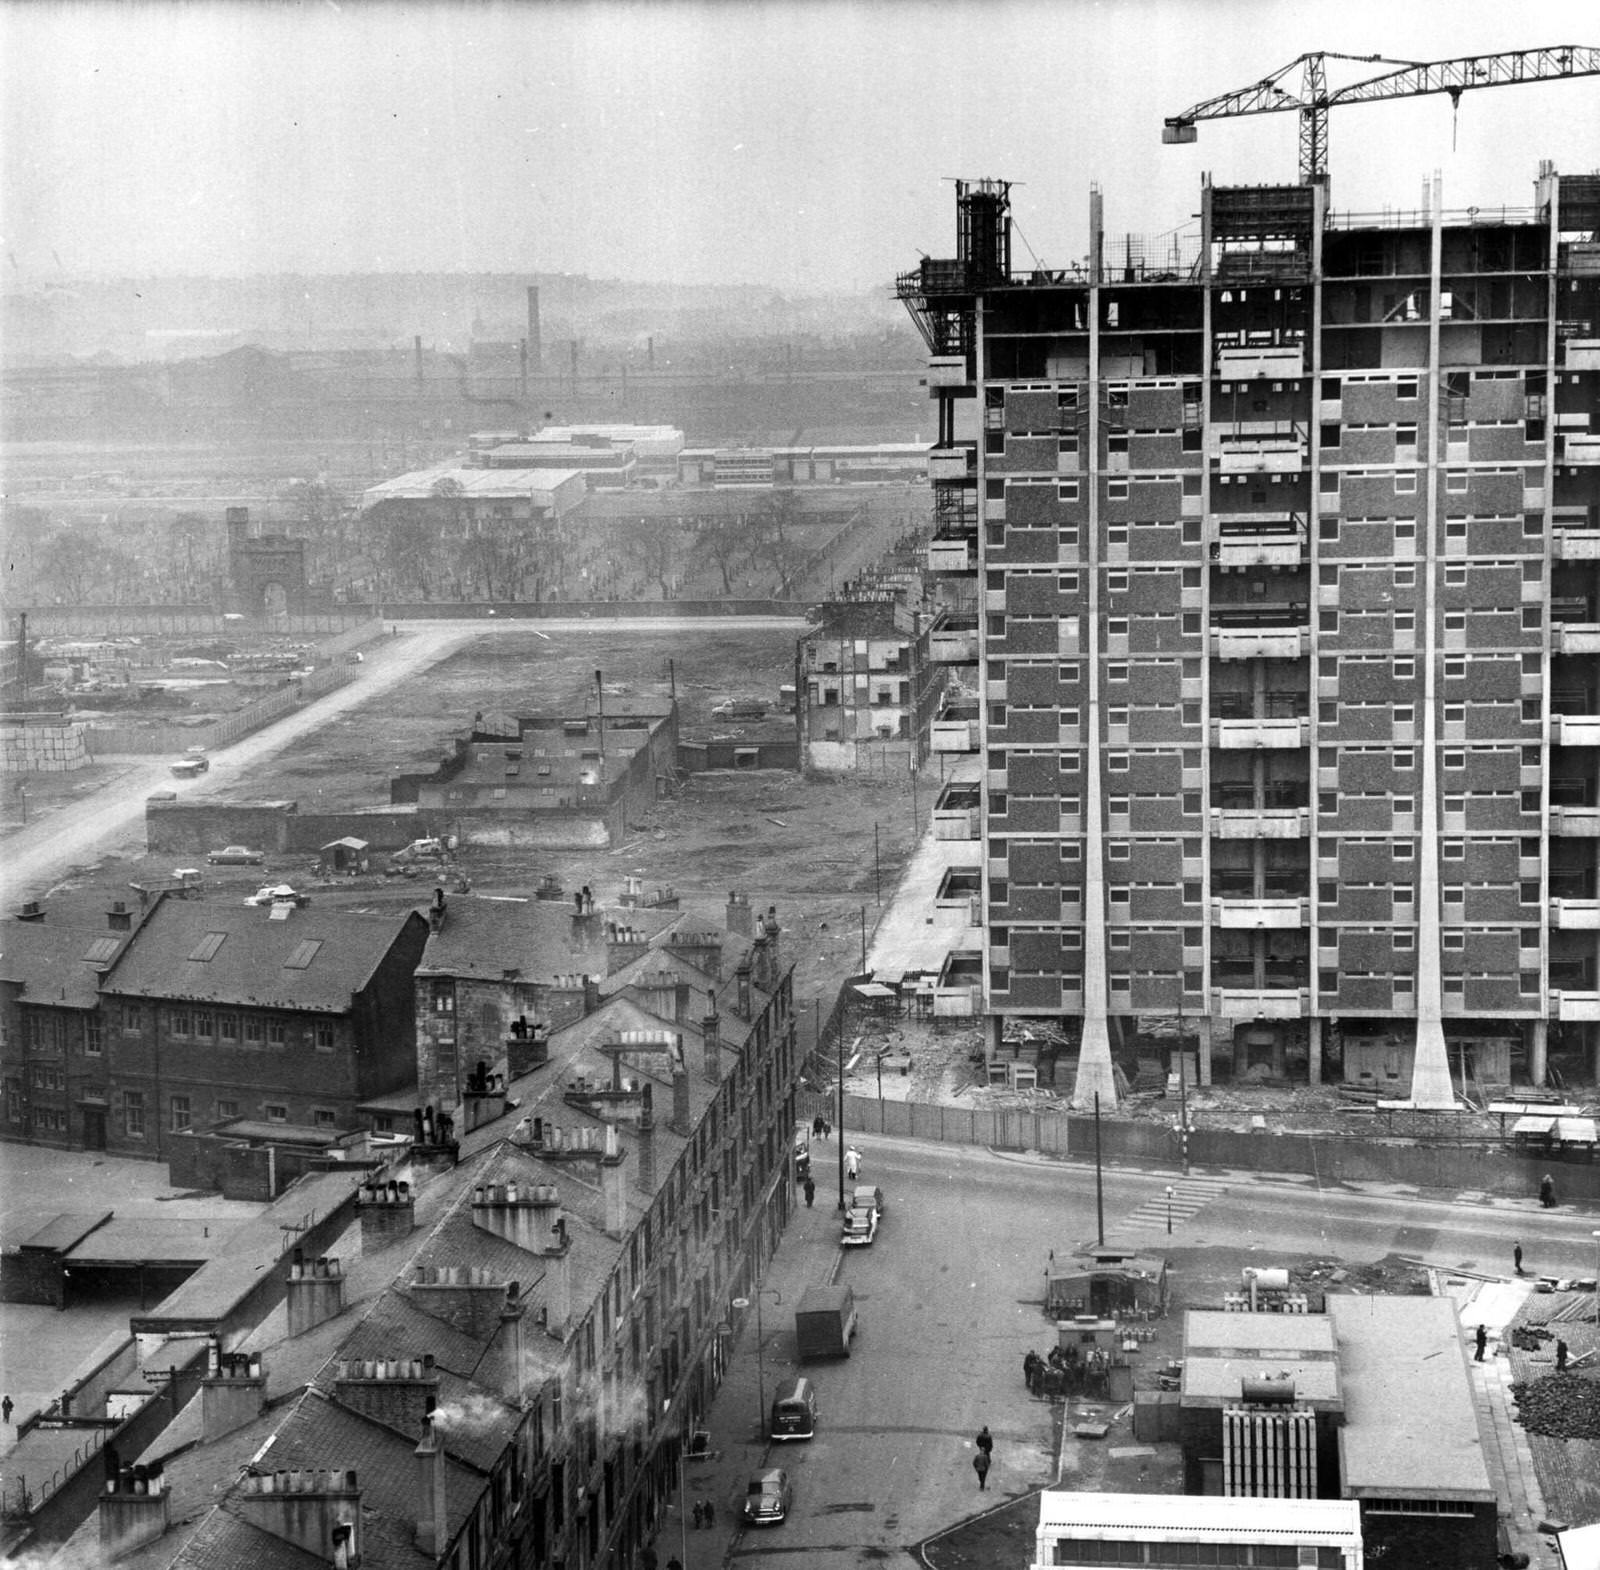 Modern housing under construction beside old tenements in the Gorbals area of Glasgow, 1960